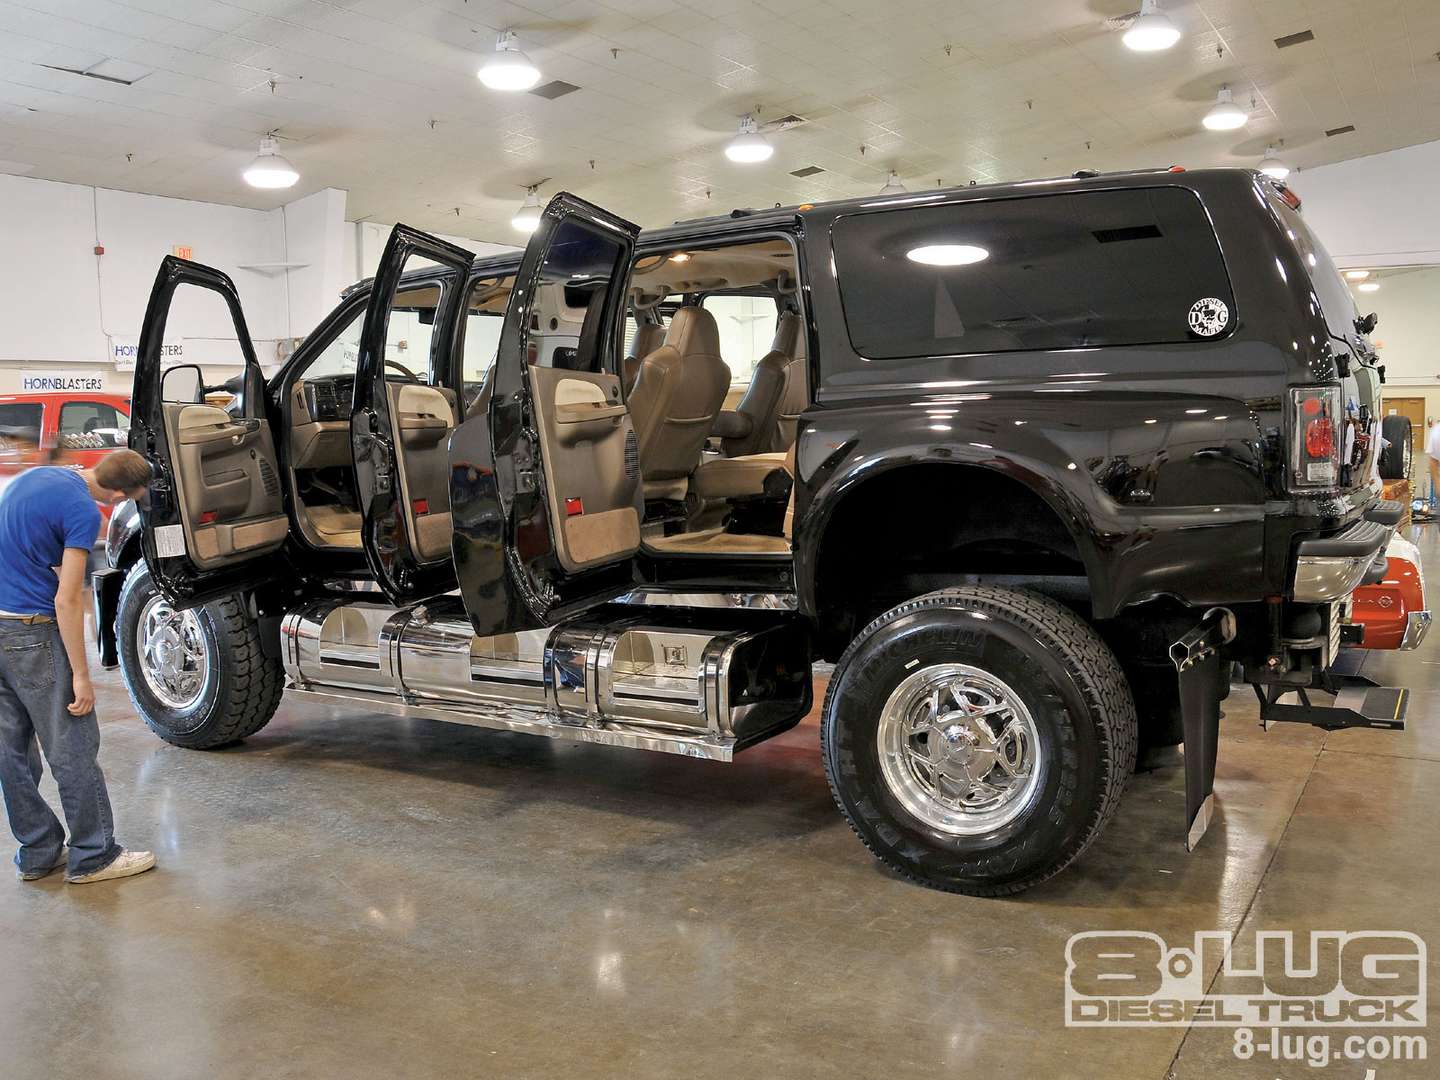 Ford F-650